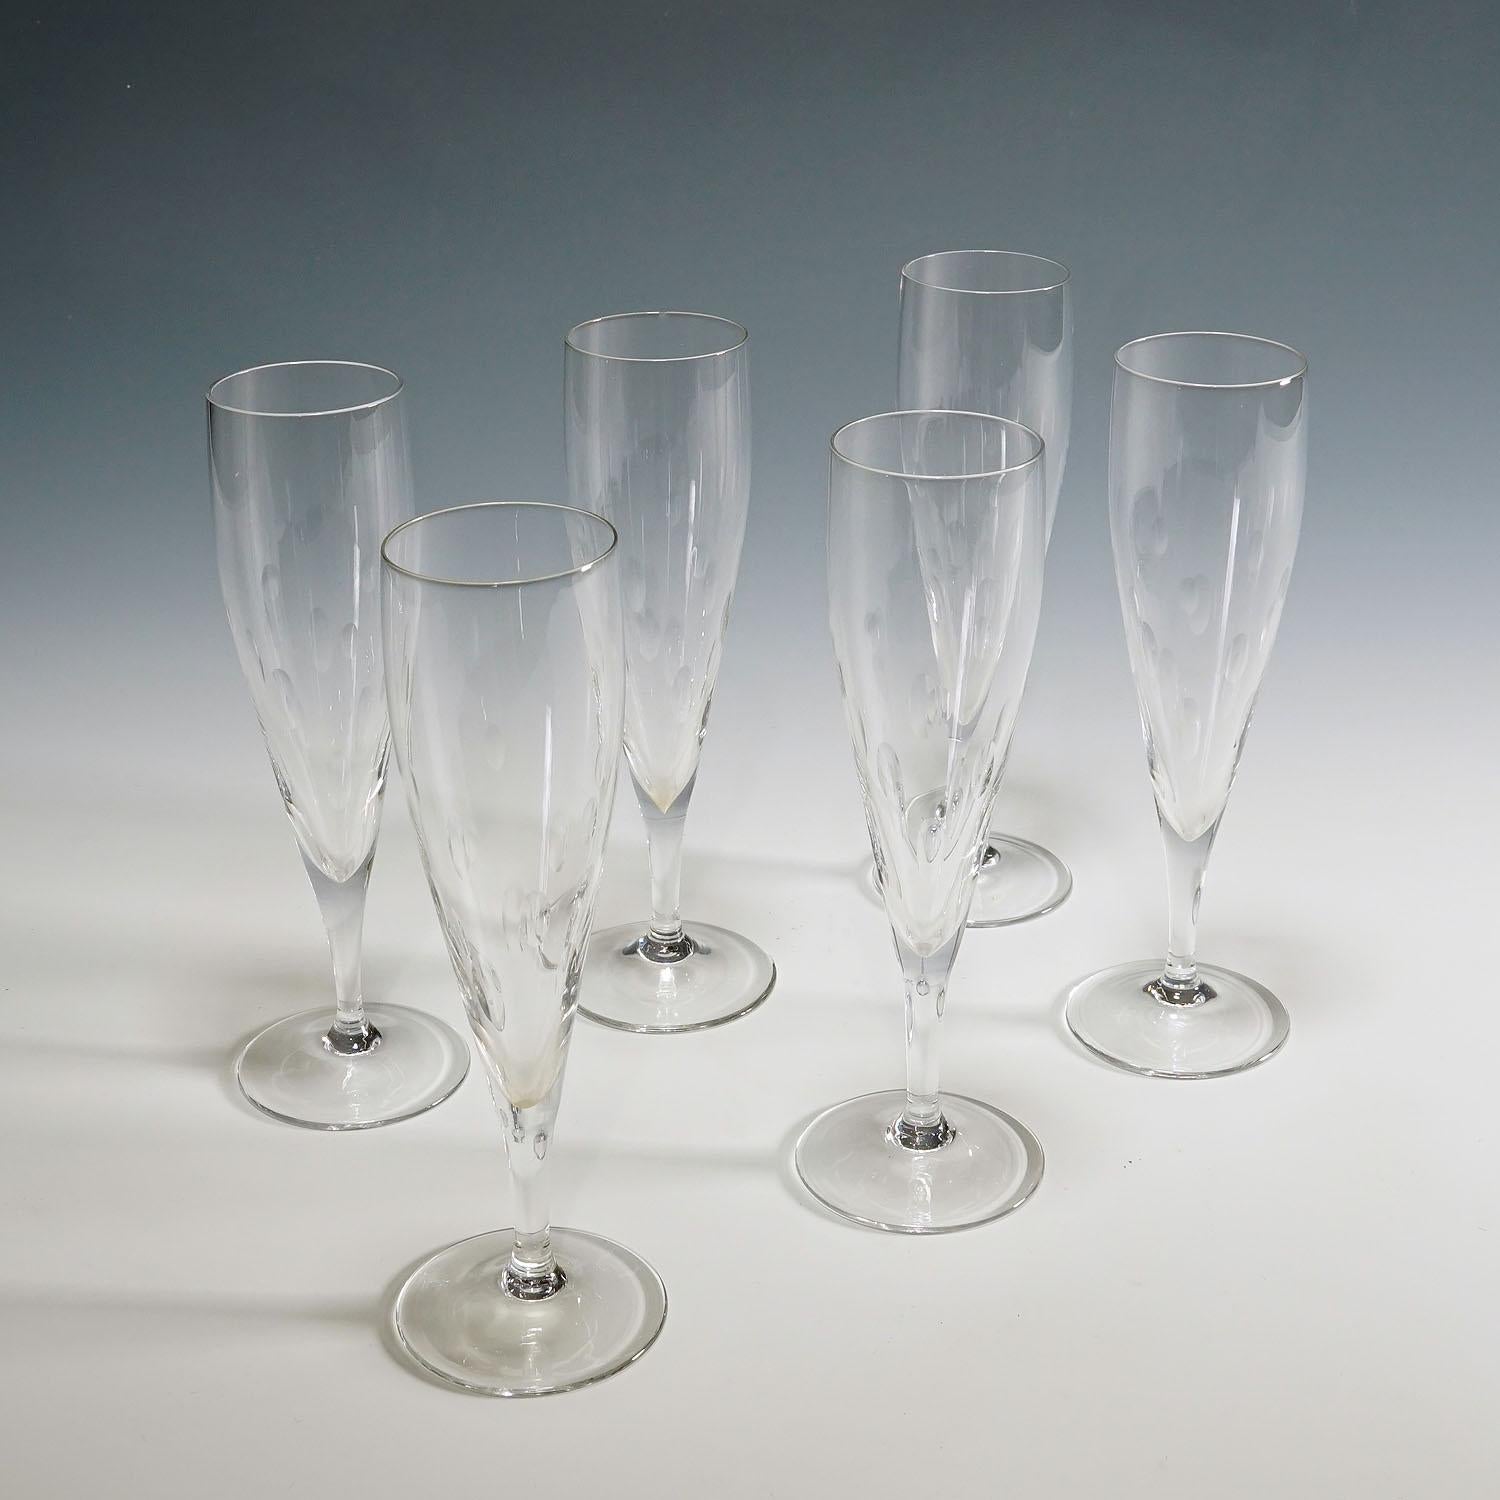 Mid-Century Modern Set of Six Champagne Flutes by Wagenfeld for Wmf, Germany, 1950s